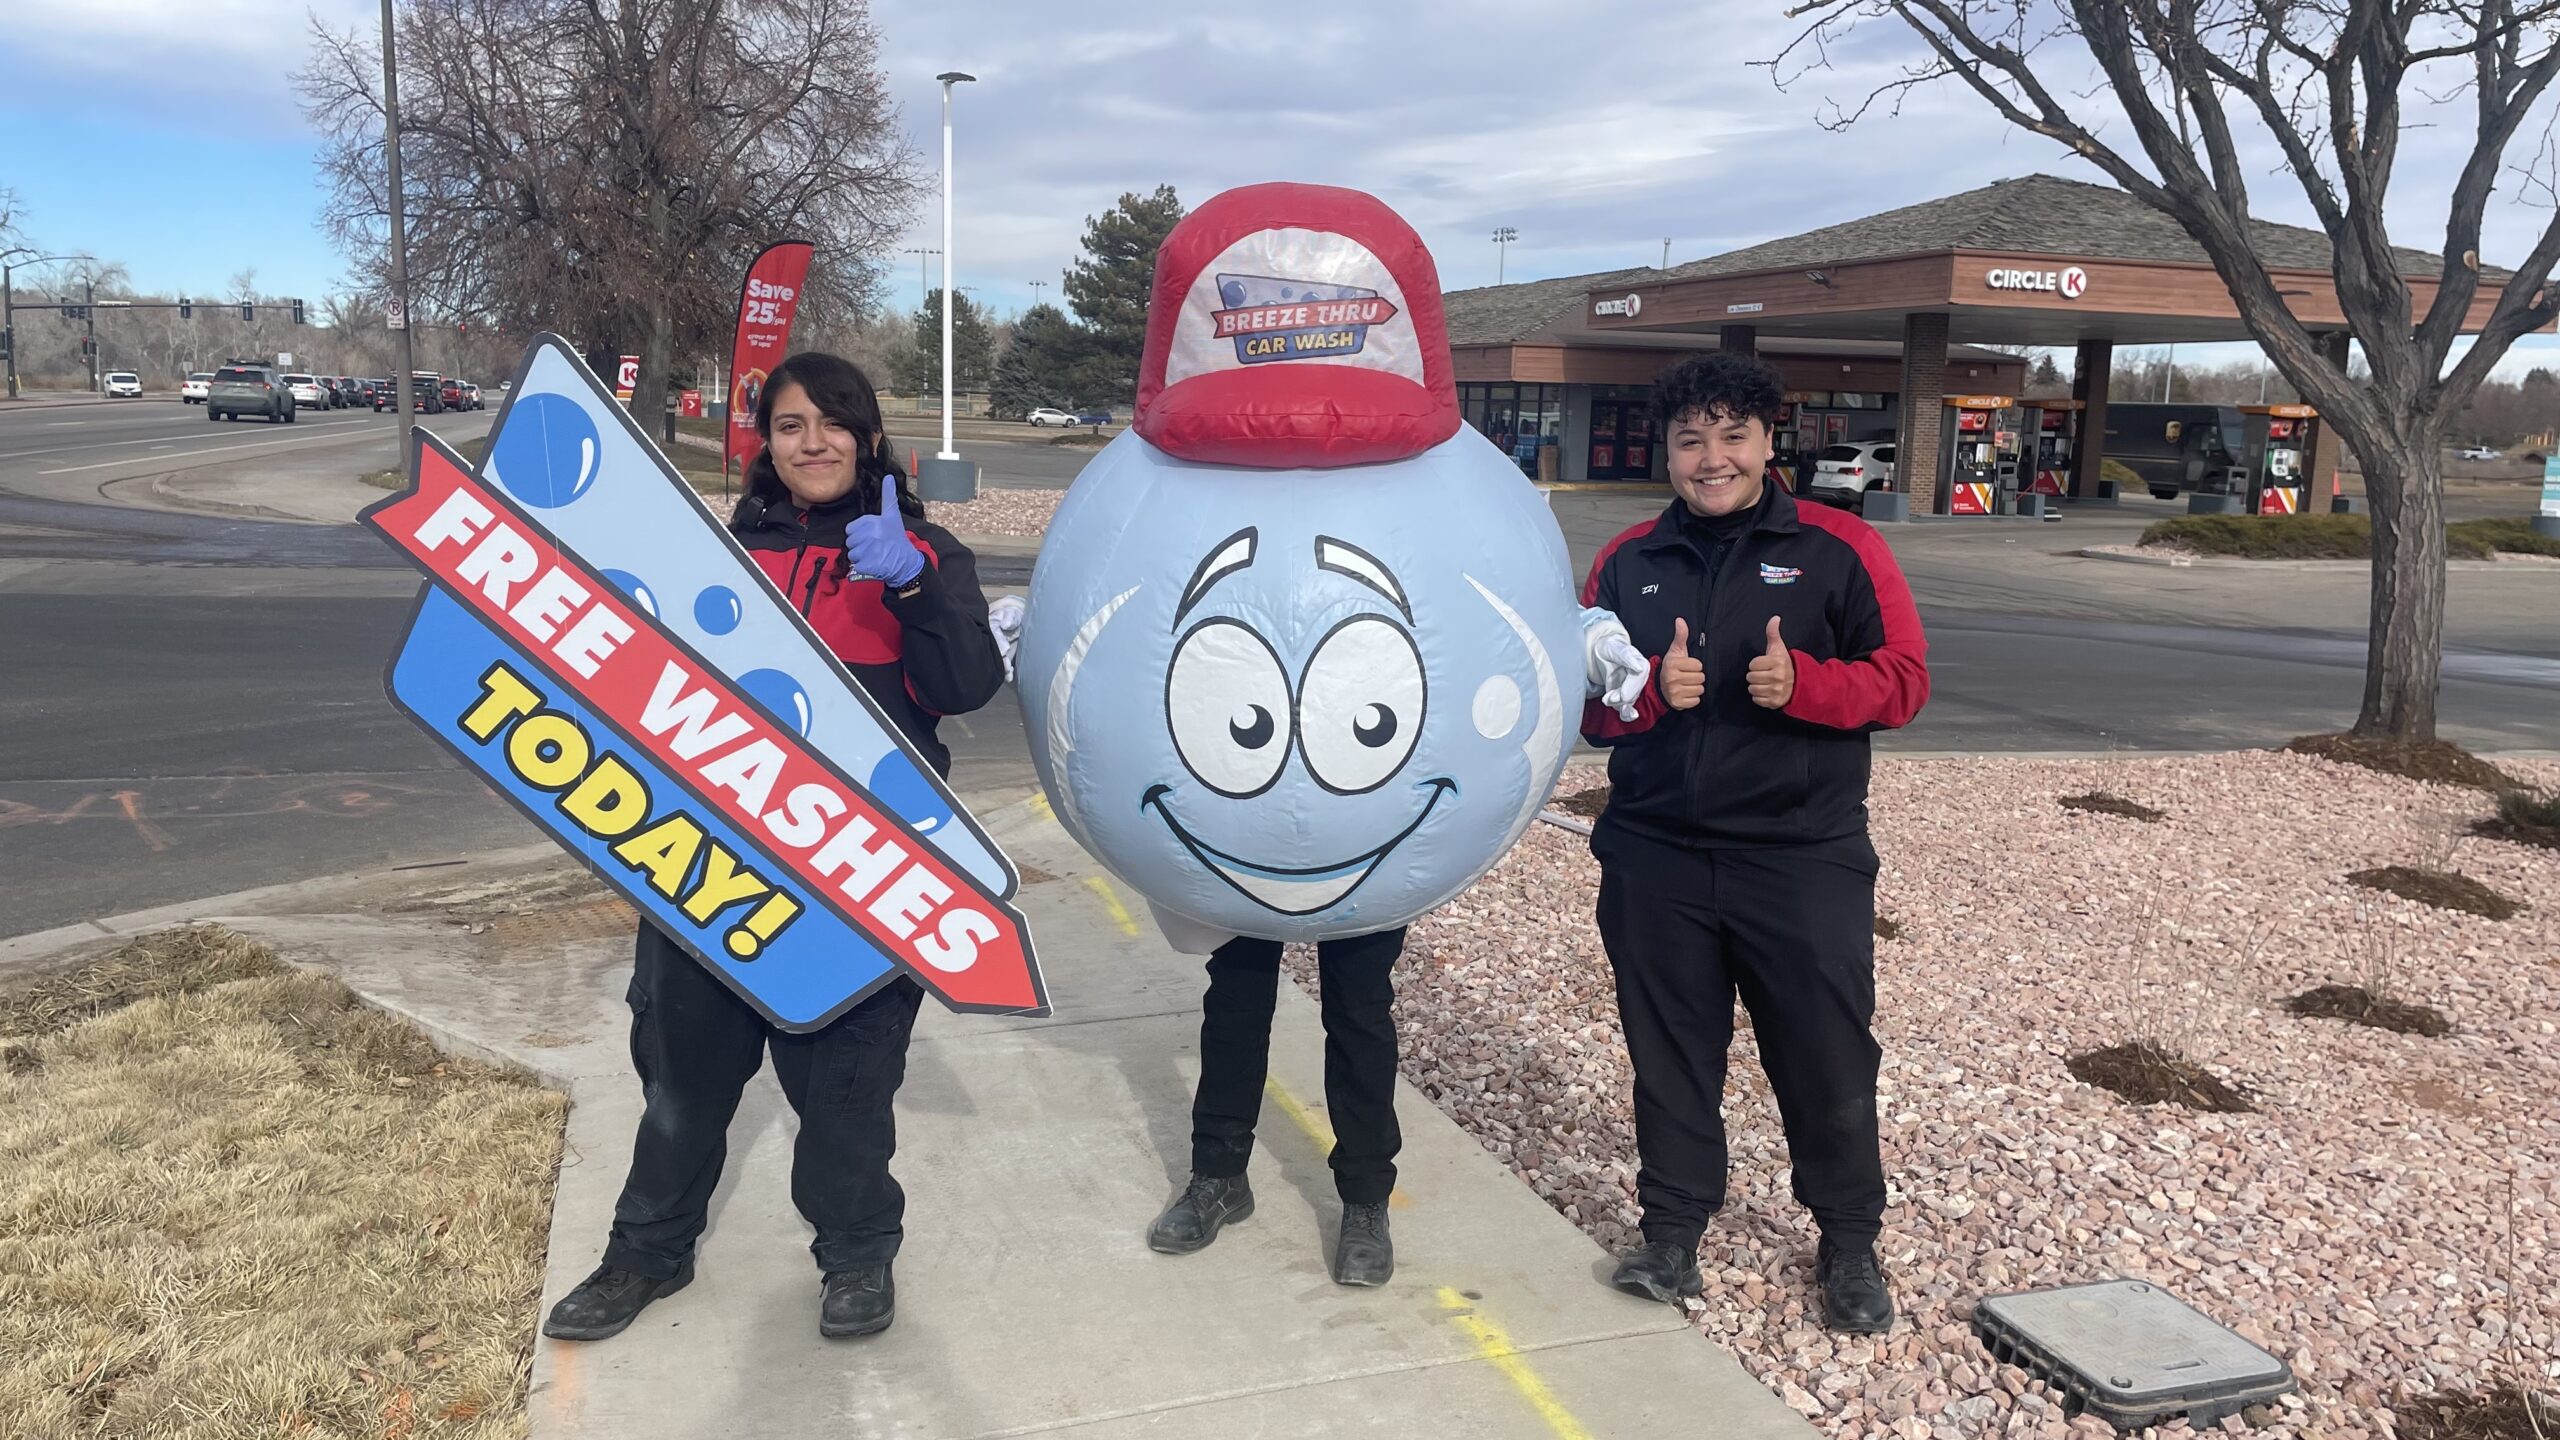 Breeze Thru Car Wash Team offering FREE Washes in Celebration of New West Loveland Location!